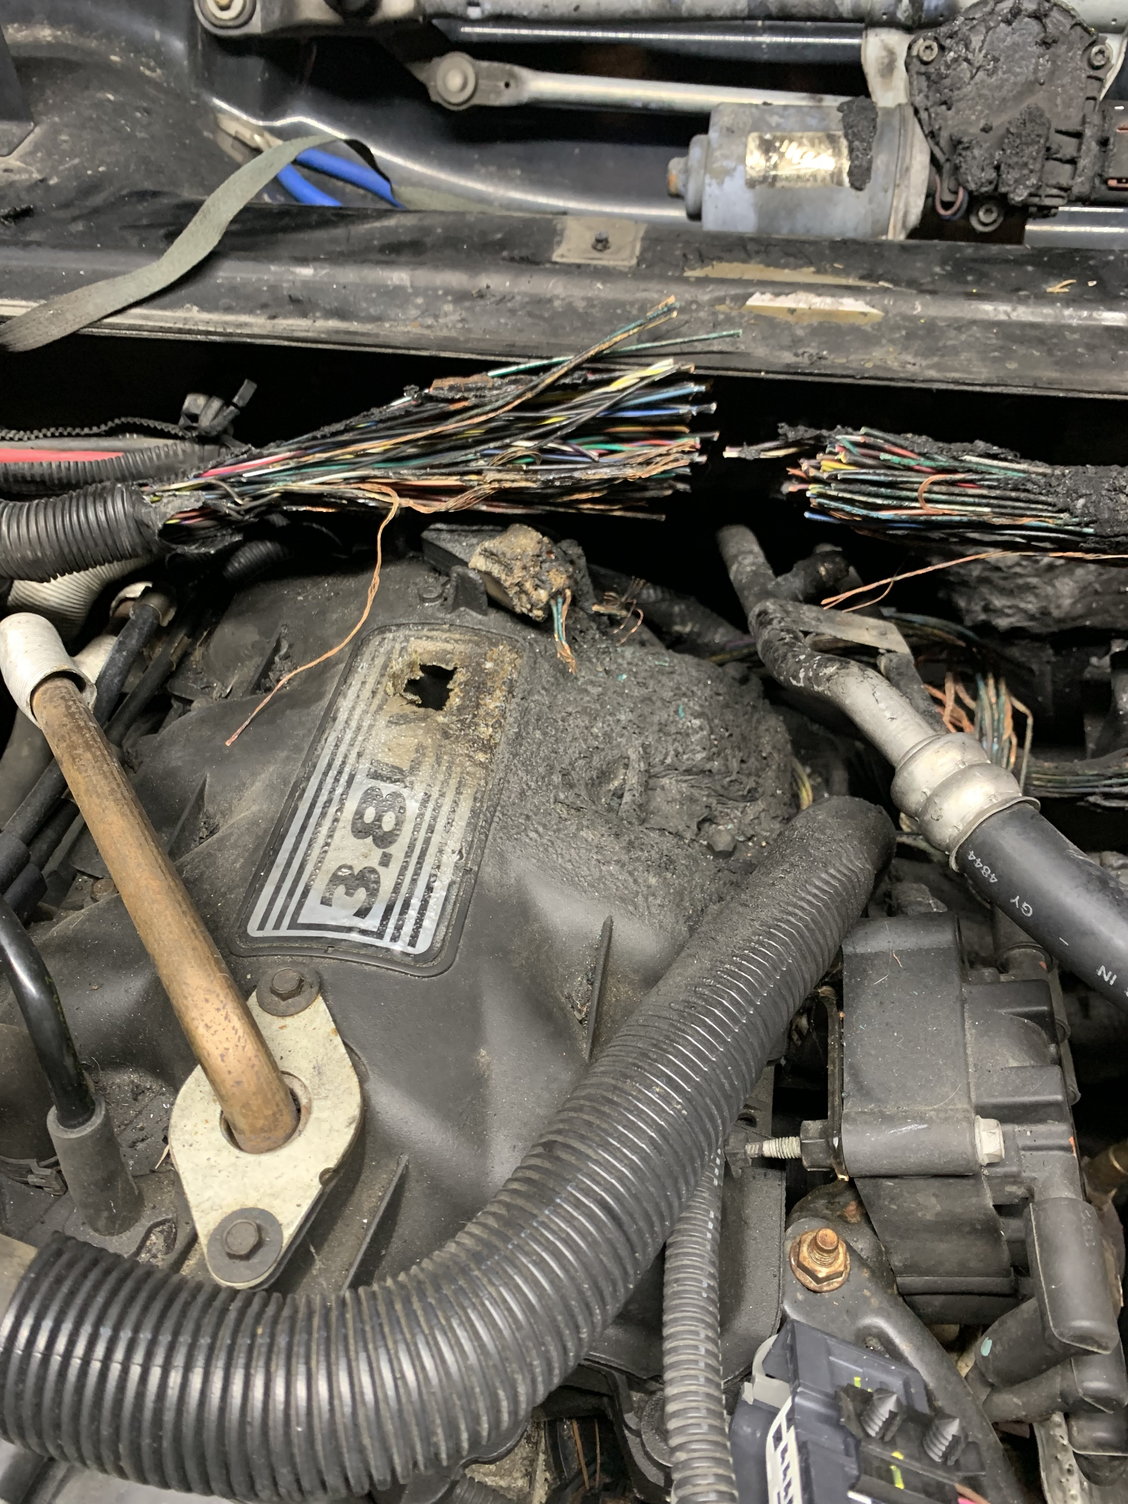 Wiring Part Numbers  - The top destination for Jeep JK and JL  Wrangler news, rumors, and discussion